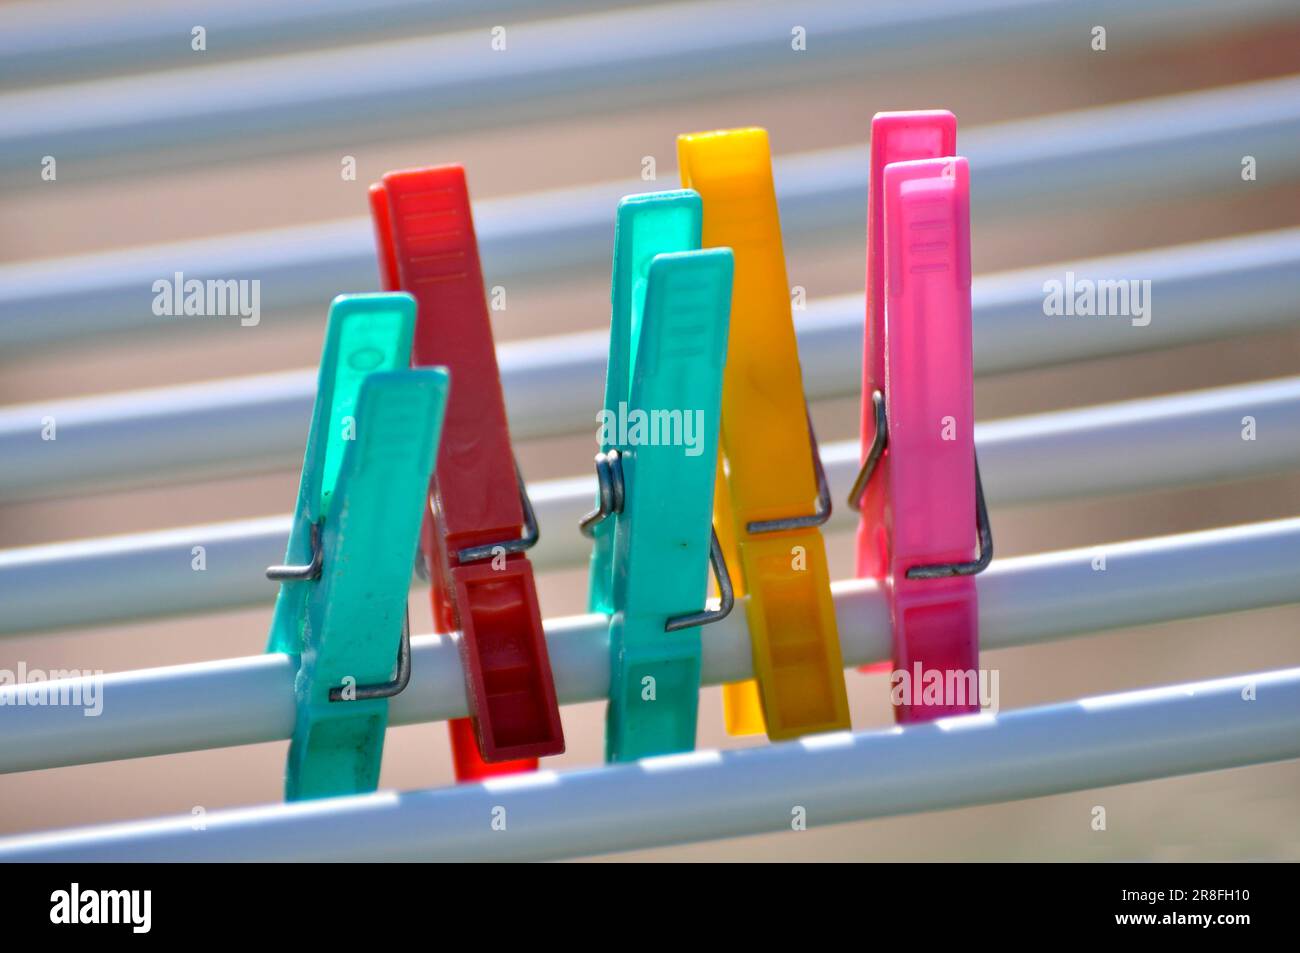 Colourful plastic clothes pegs Stock Photo